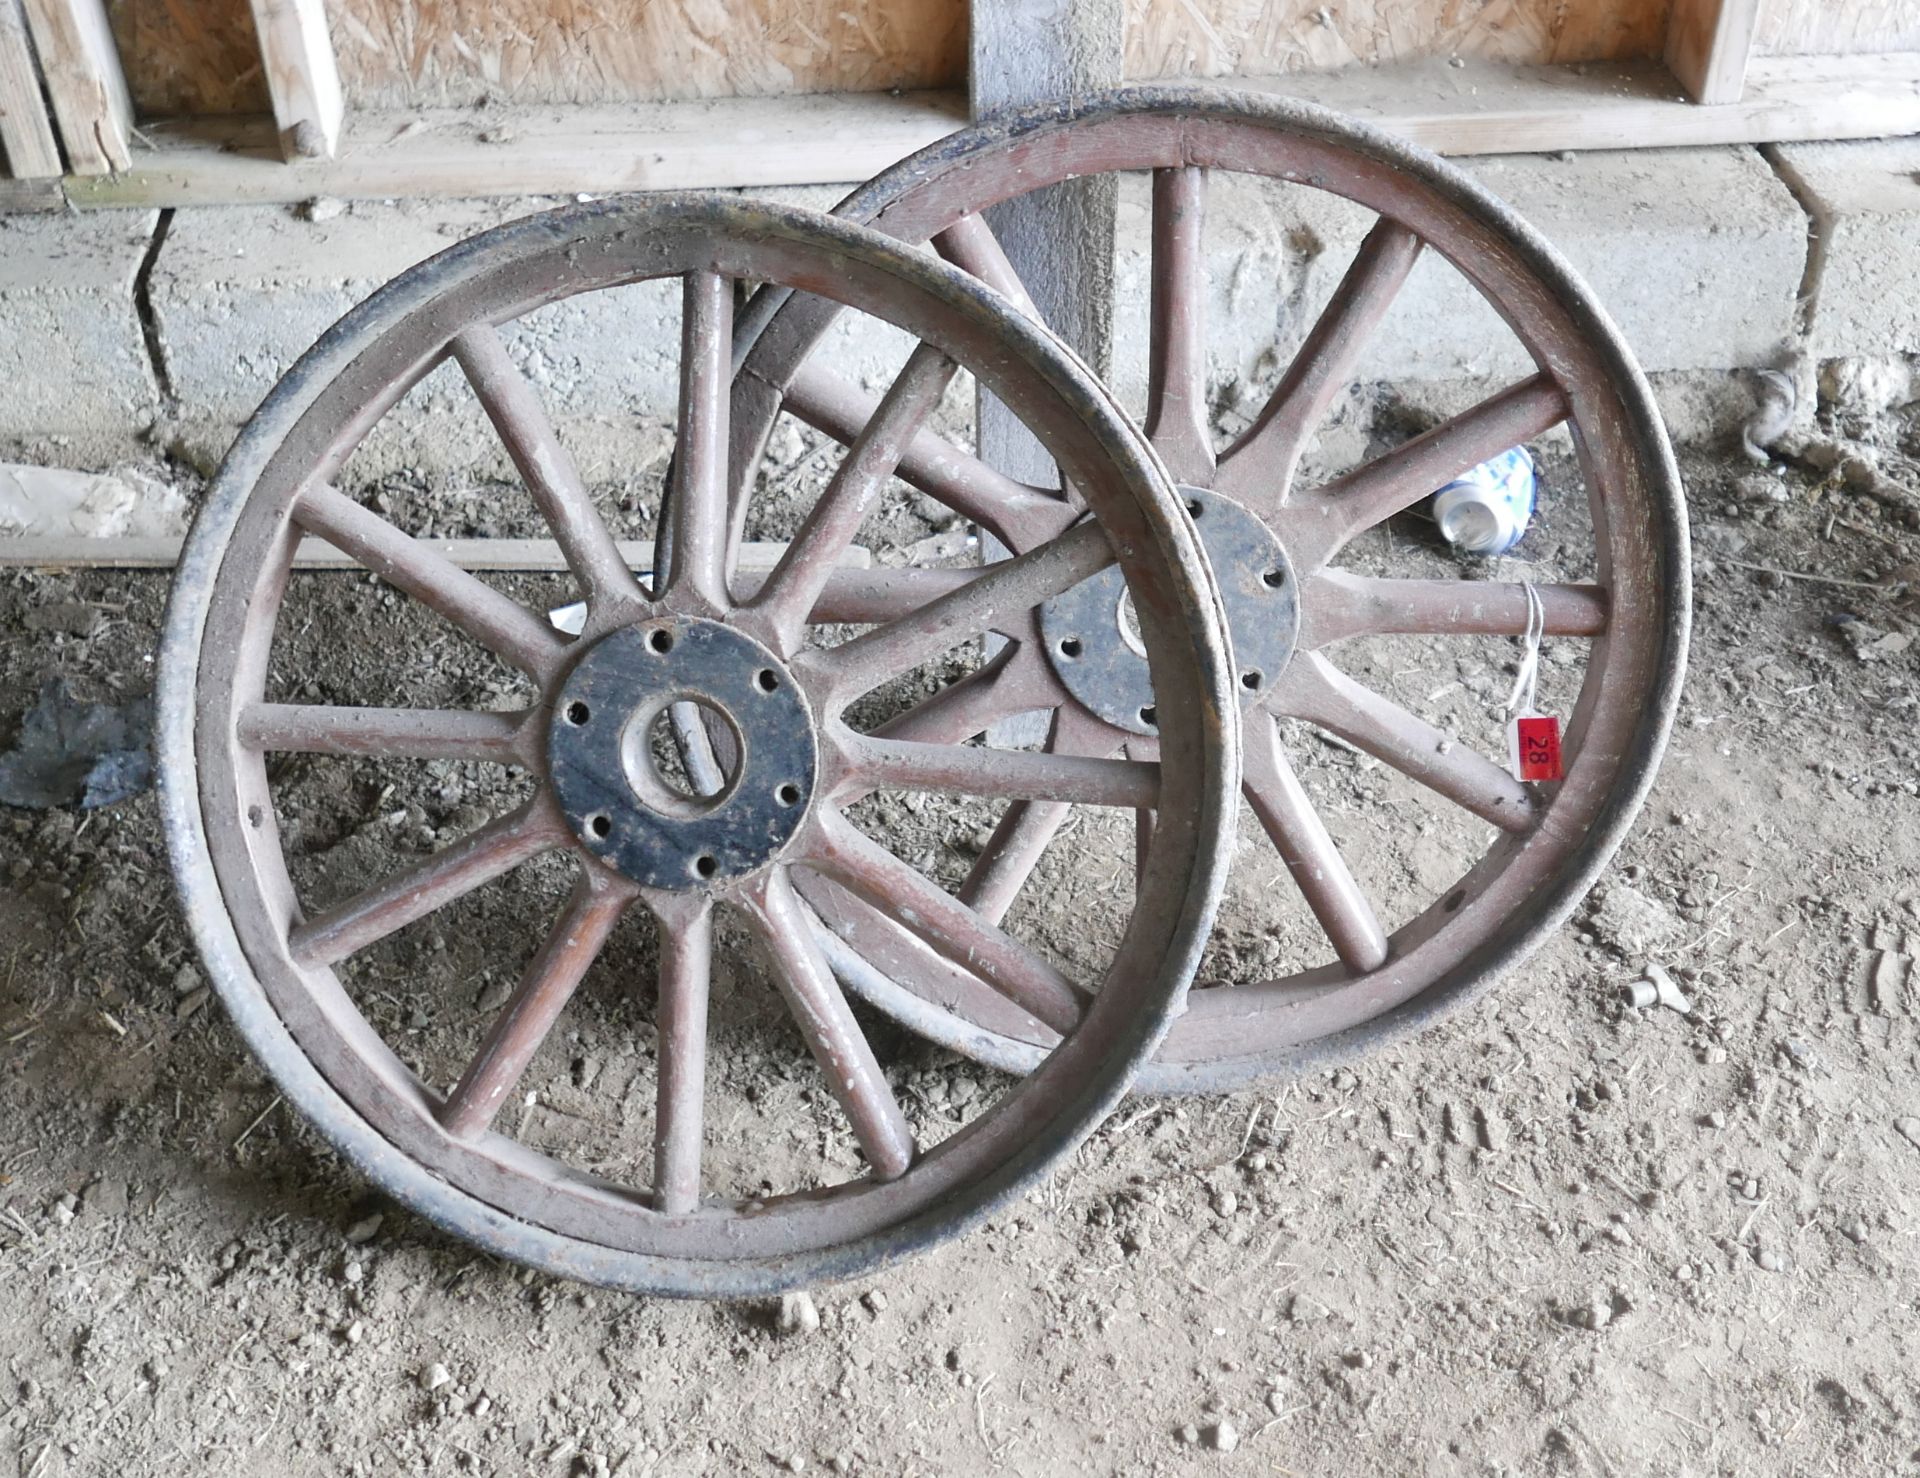 Pair of Model T Ford Wheels.